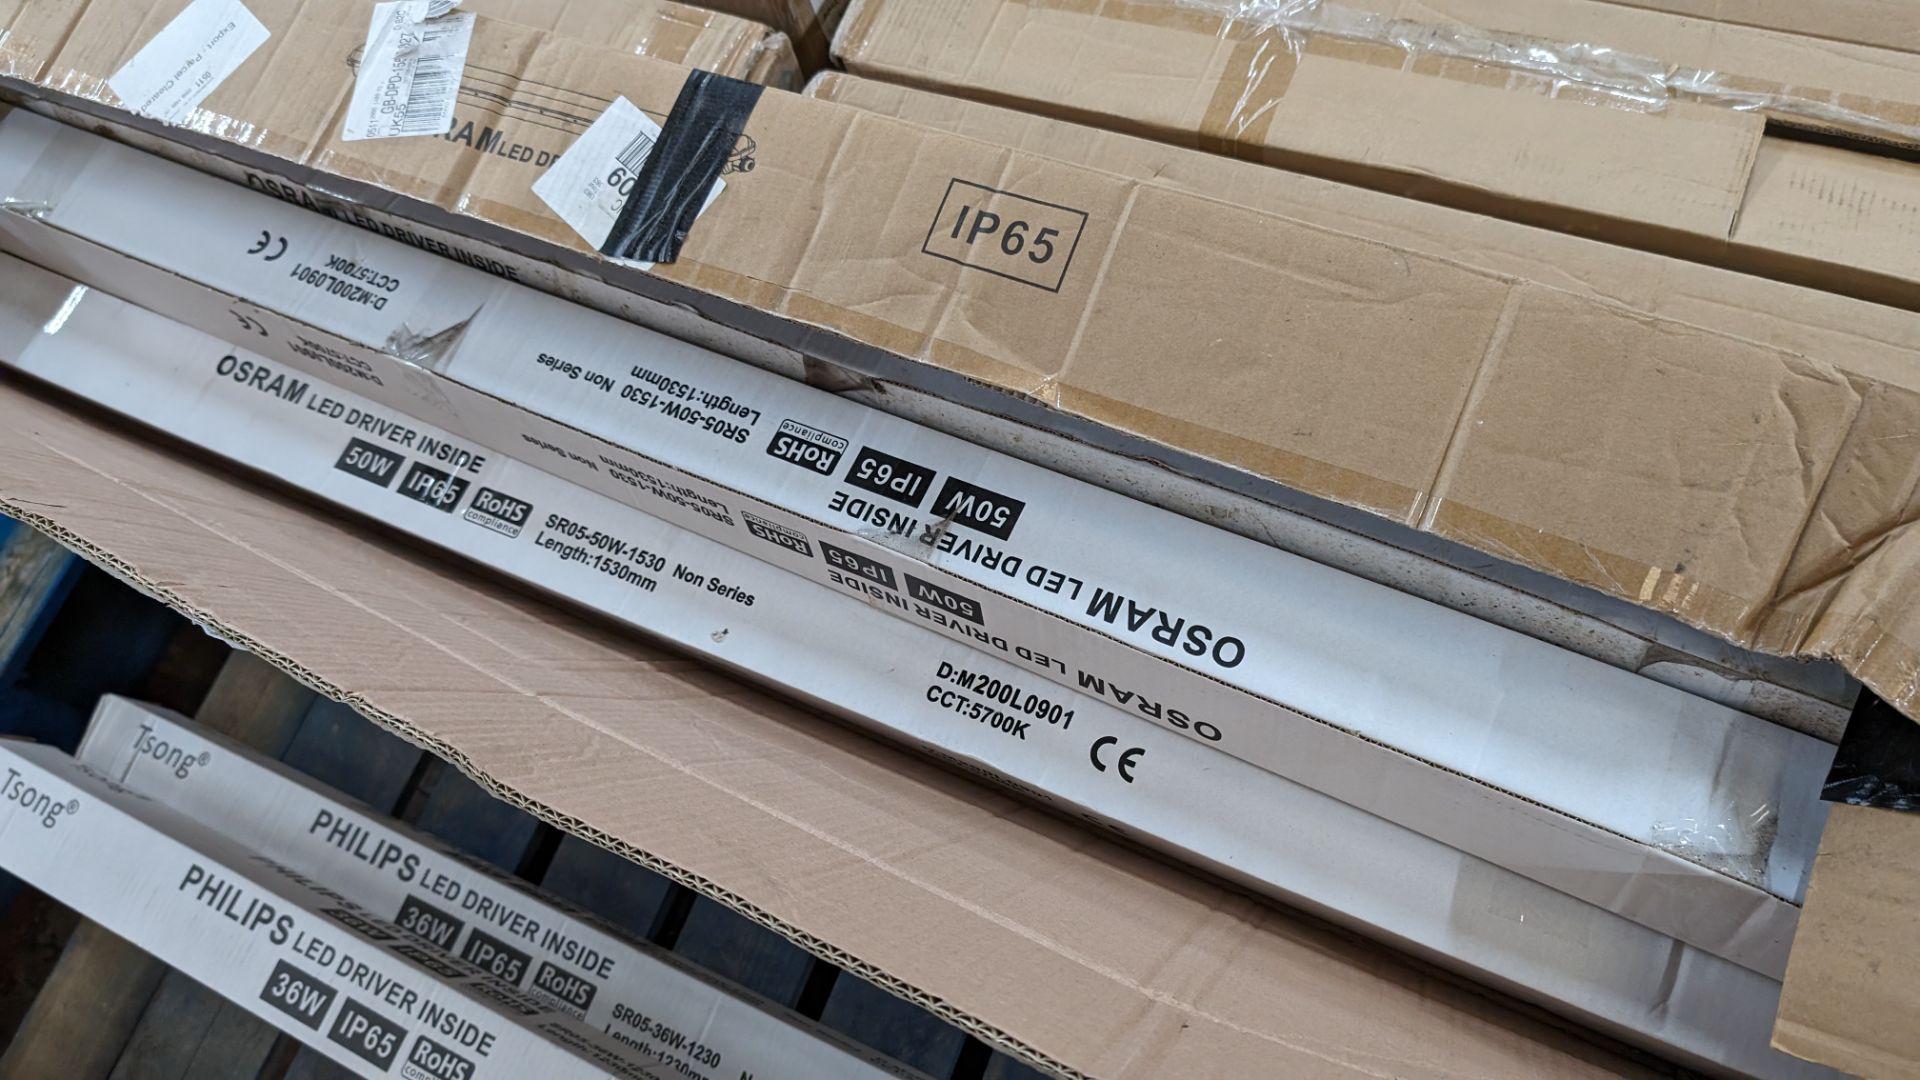 14 off Osram IP65 1530mm 5700k LED batten lighting units with Osram LED drivers - 1 full part and 1 - Image 3 of 5